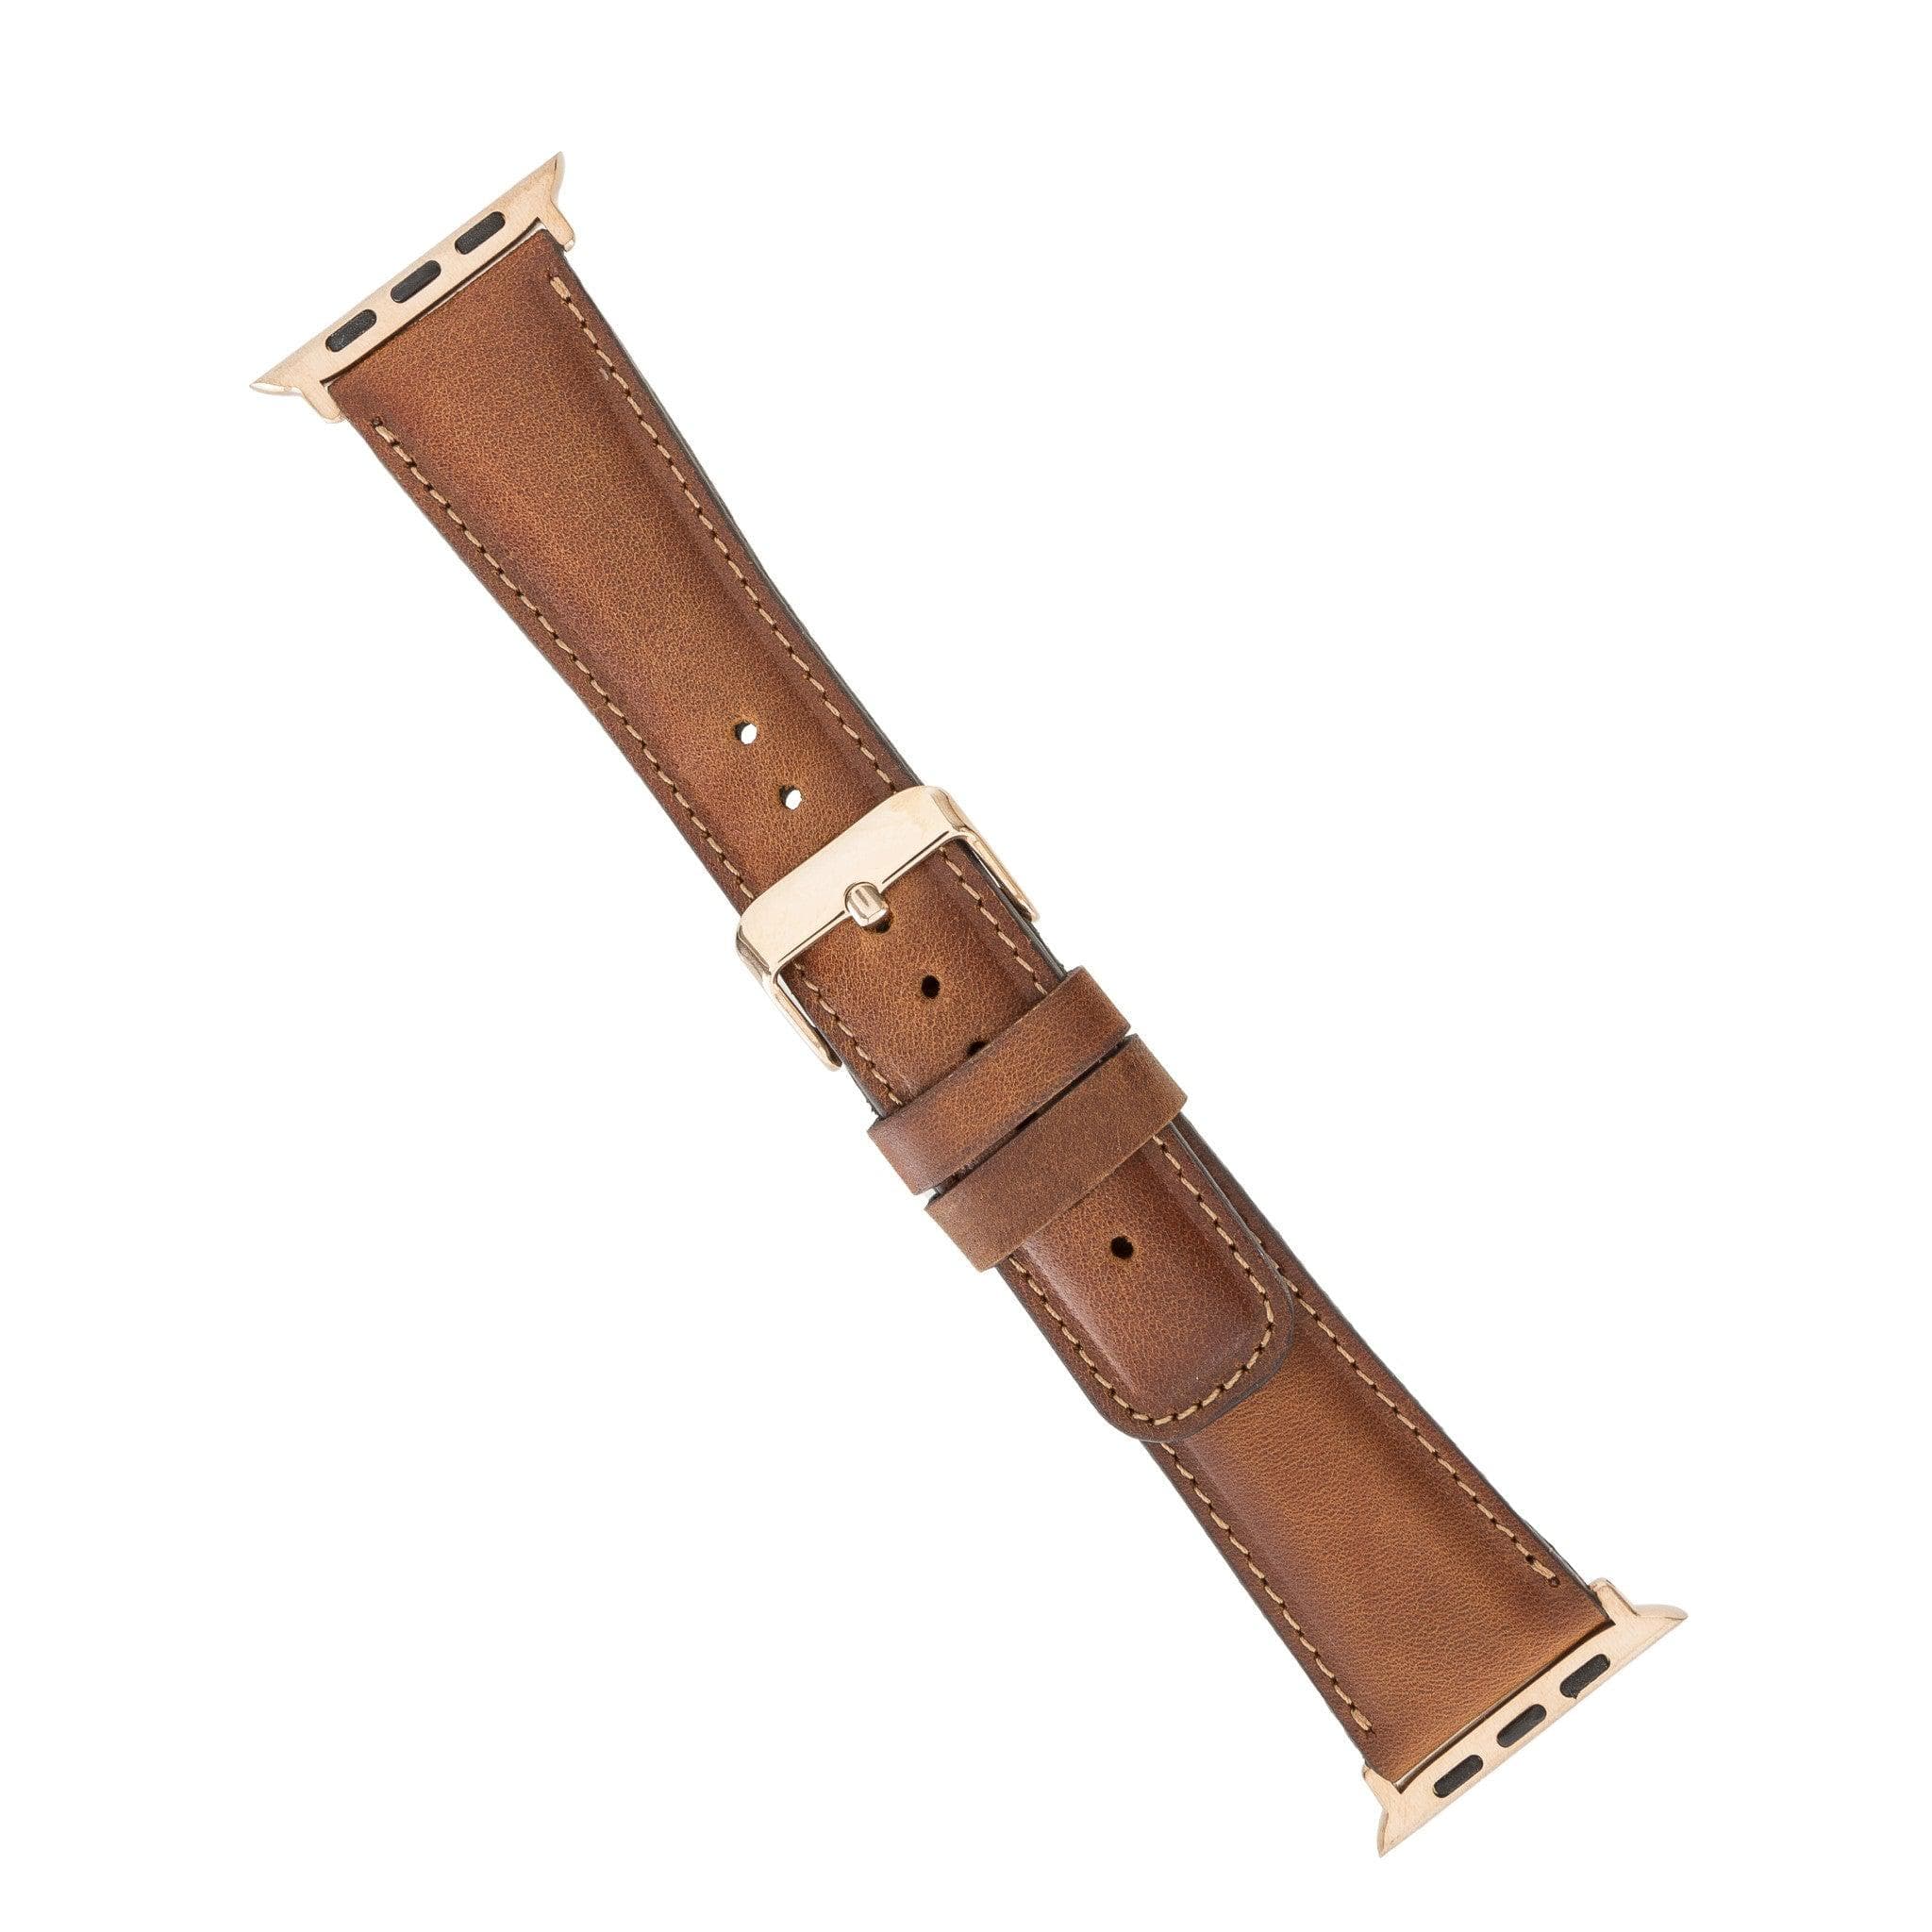 Hereford Classic Apple Watch Leather Straps Bouletta LTD